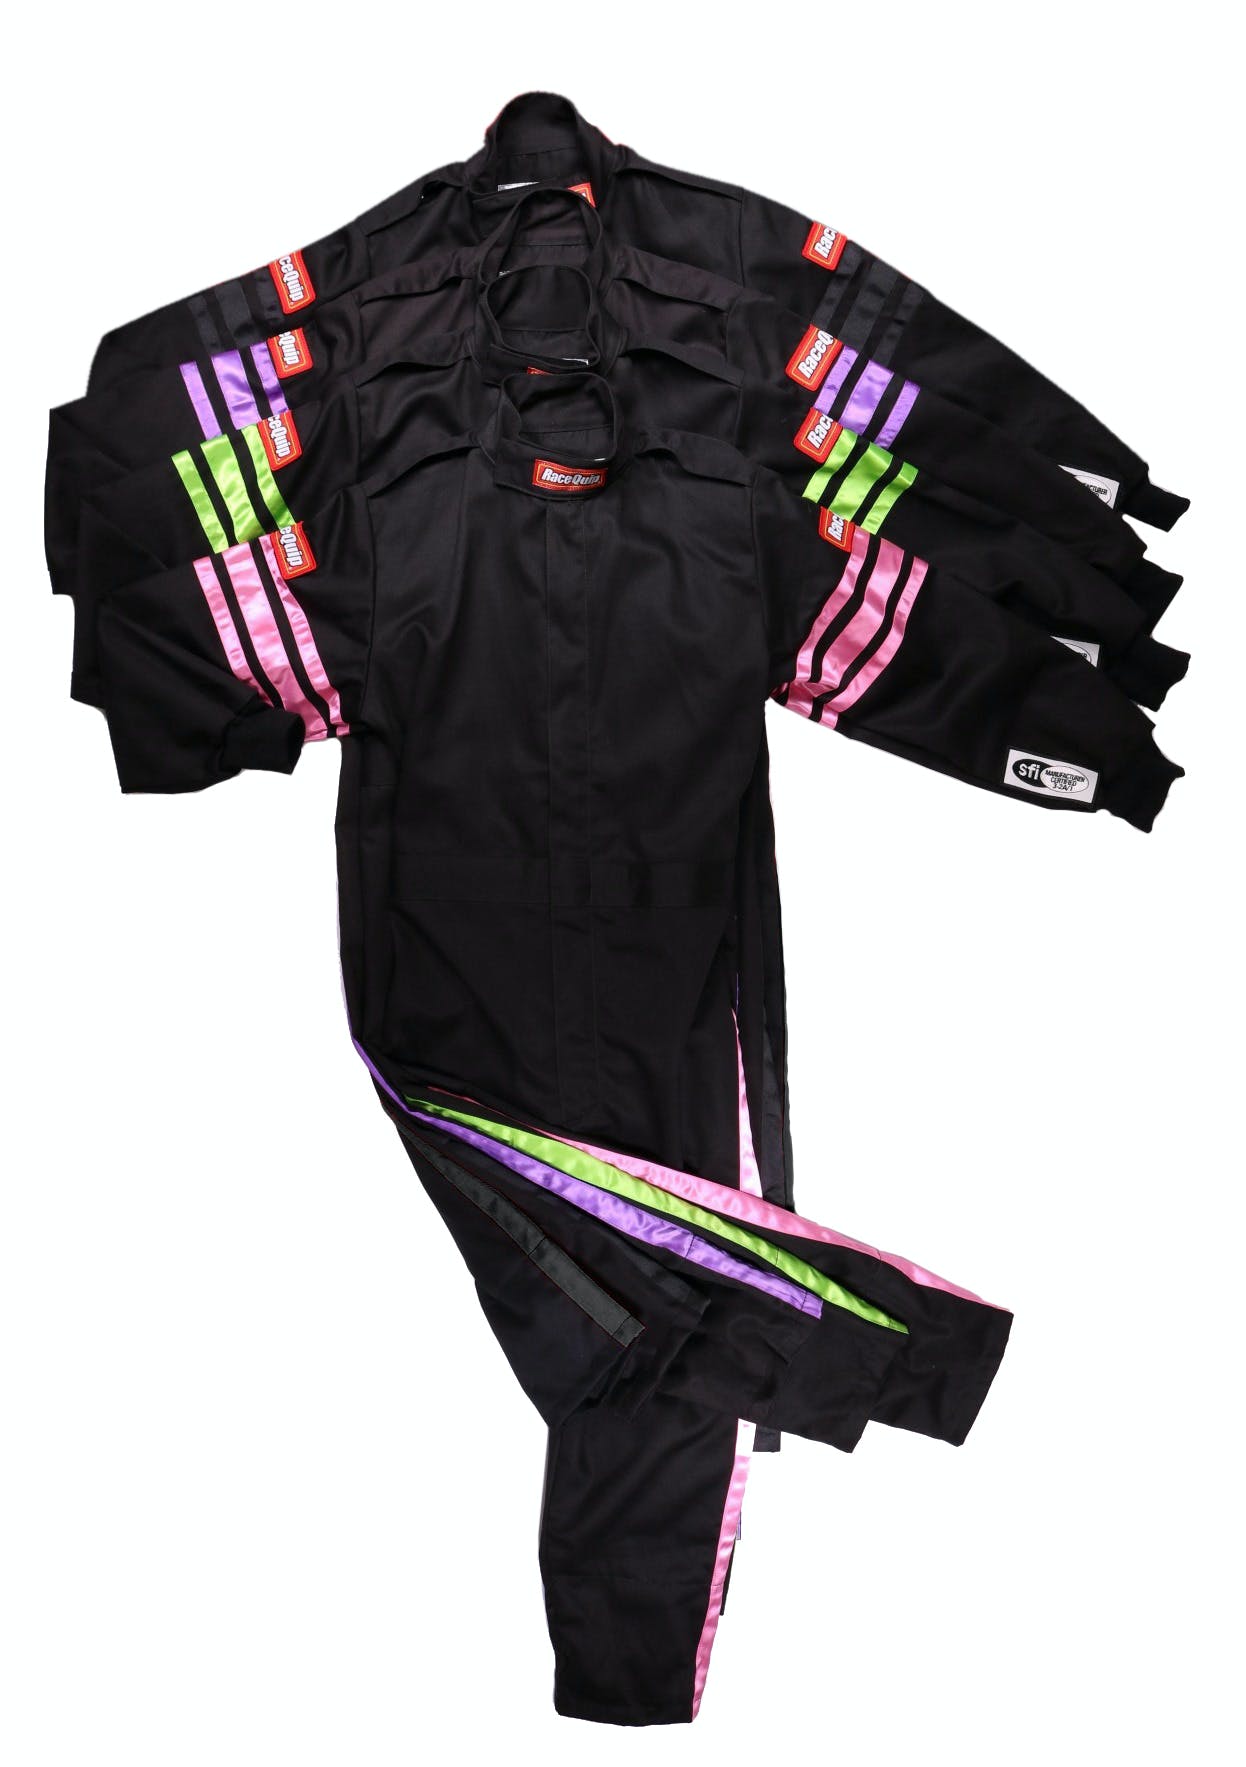 RaceQuip 1950795 SFI-1 Pyrovatex One-Piece Single-Layer Youth Racing Fire Suit (Black/Green-L)